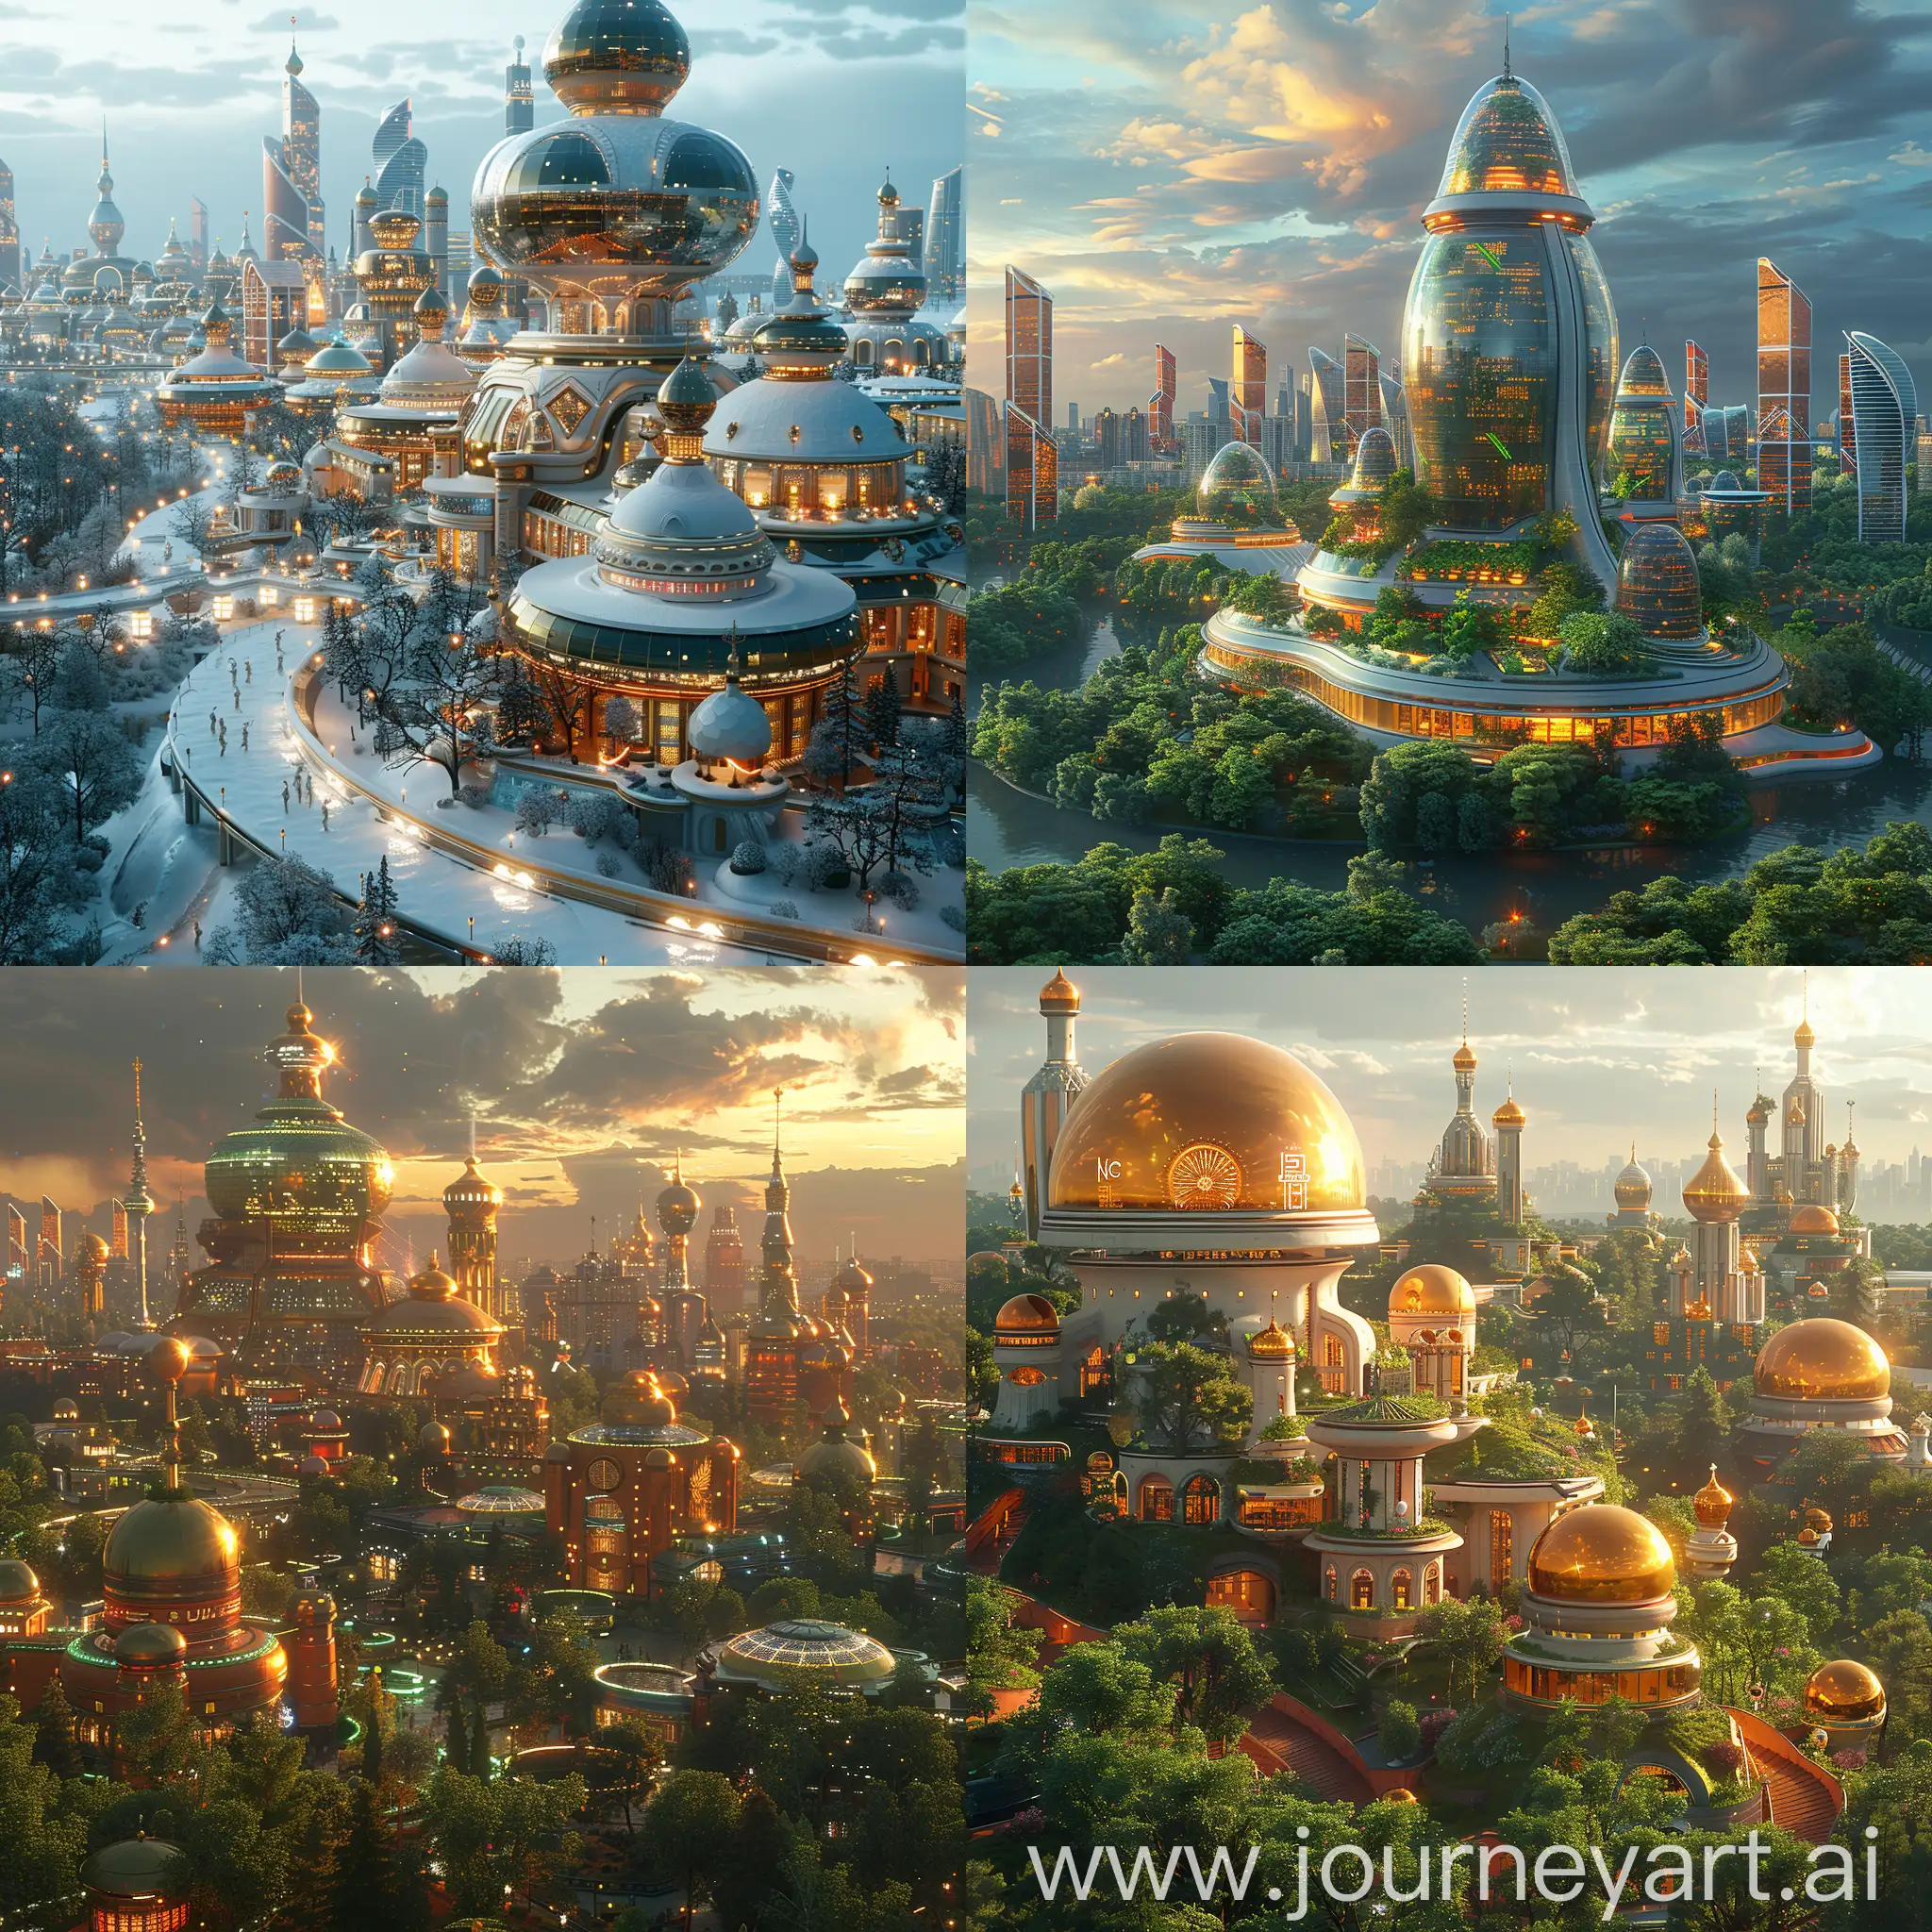 Futuristic-Moscow-2100-Advanced-World-with-Augmented-Reality-and-Smart-Technology